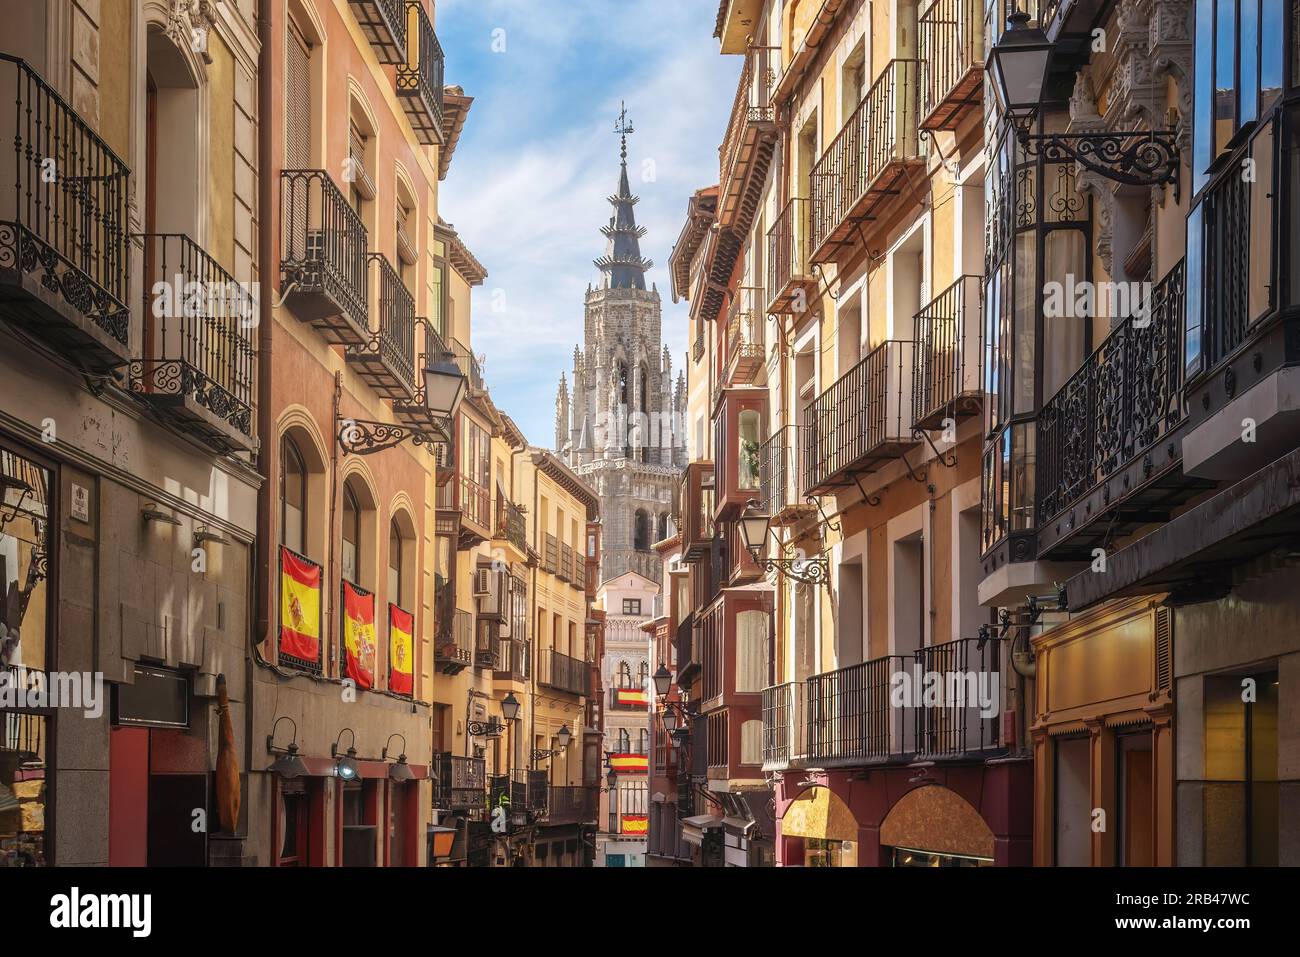 Street and Toledo Cathedral Tower - Toledo, Spain Stock Photo